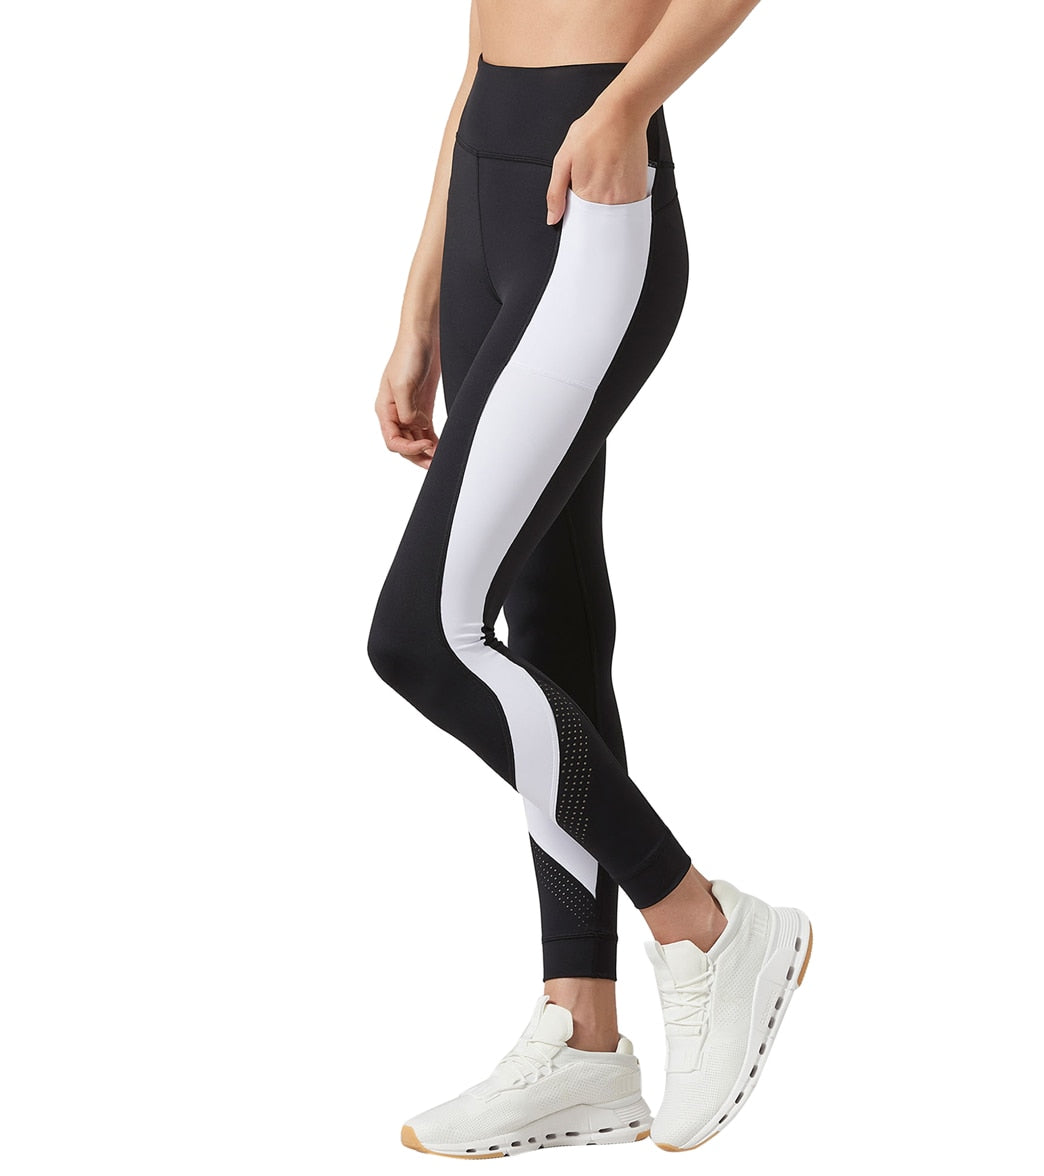 Lilybod Black Legging with Black and White Stripe Details Xtra